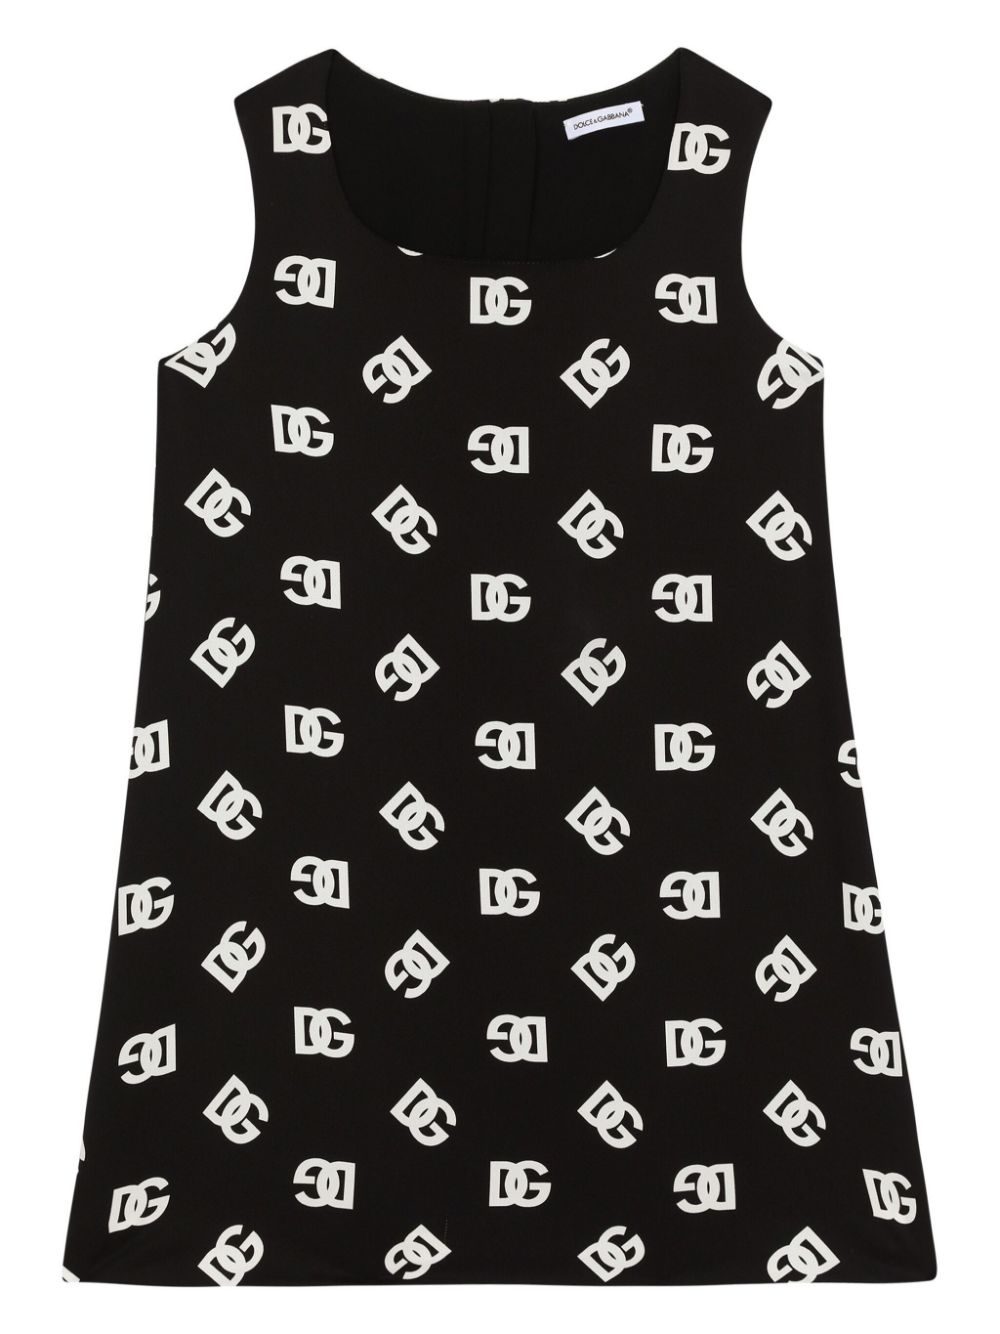 Black dress for girls with logo